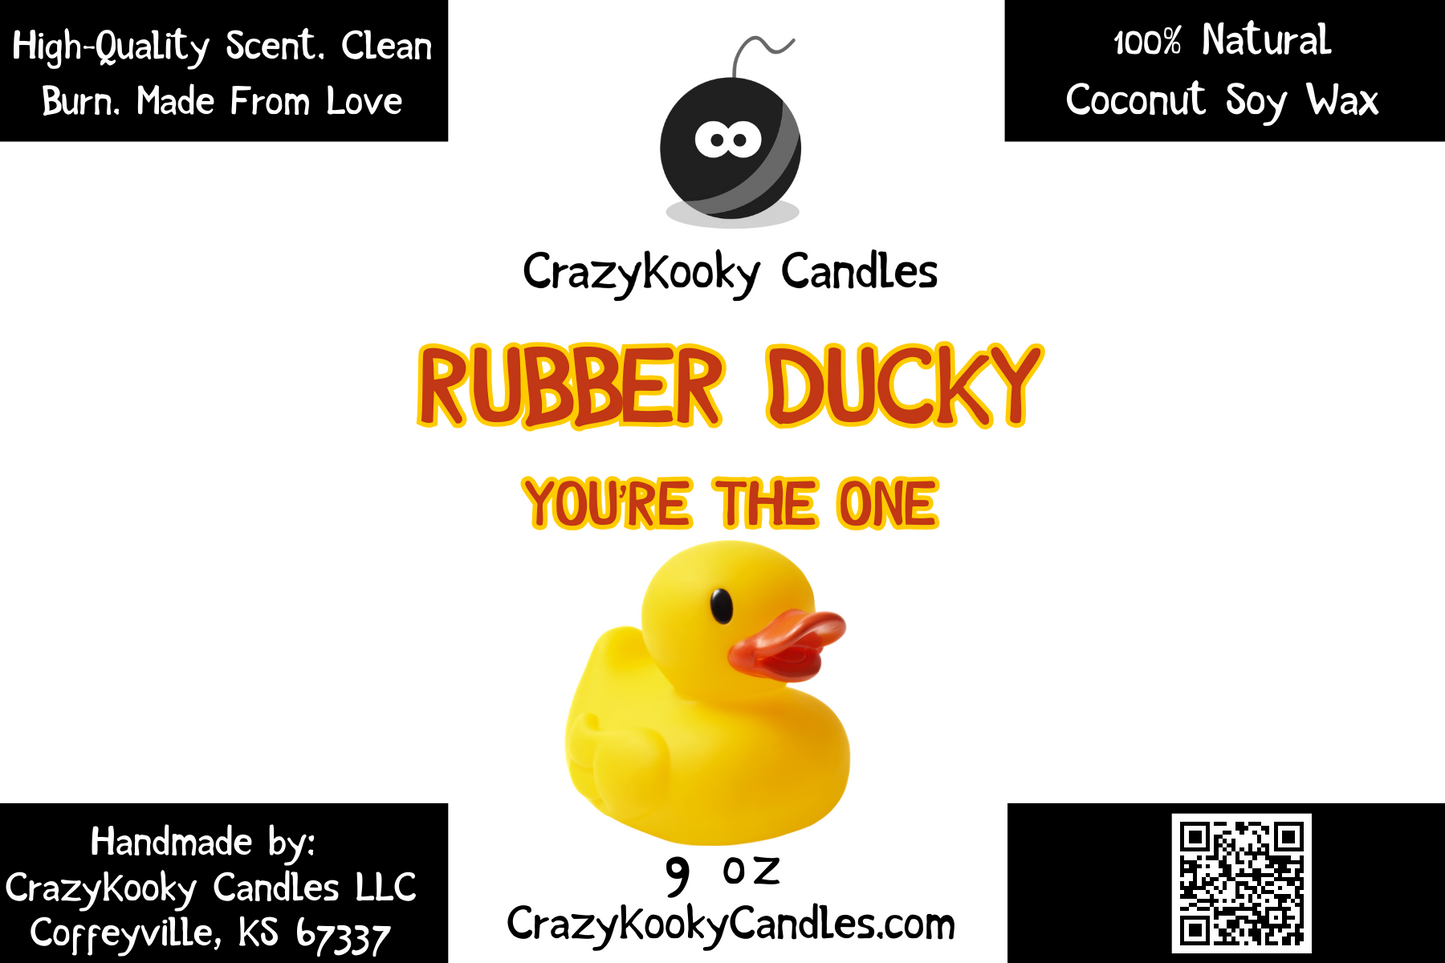 RUBBER DUCKY, YOU'RE THE ONE - Funny Candle, Scented Coconut Soy Candle, 9oz - CrazyKooky Candles LLC